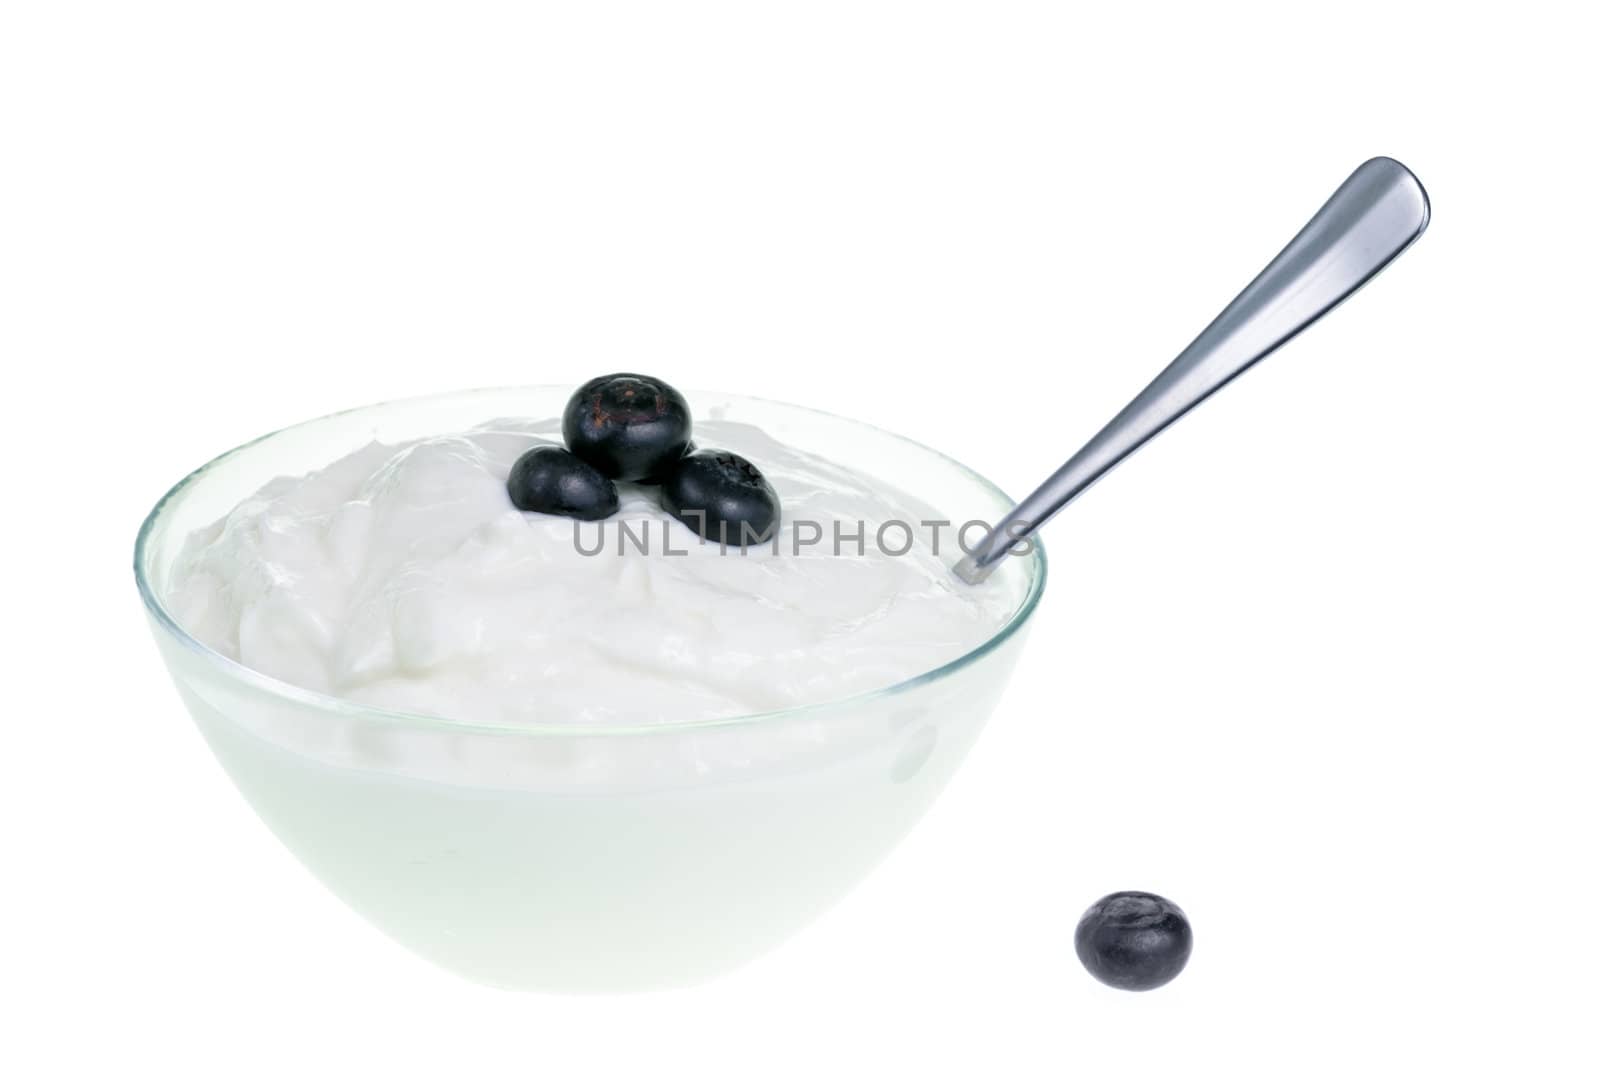 Yogurt bowl with spoon and Blueberries on white background